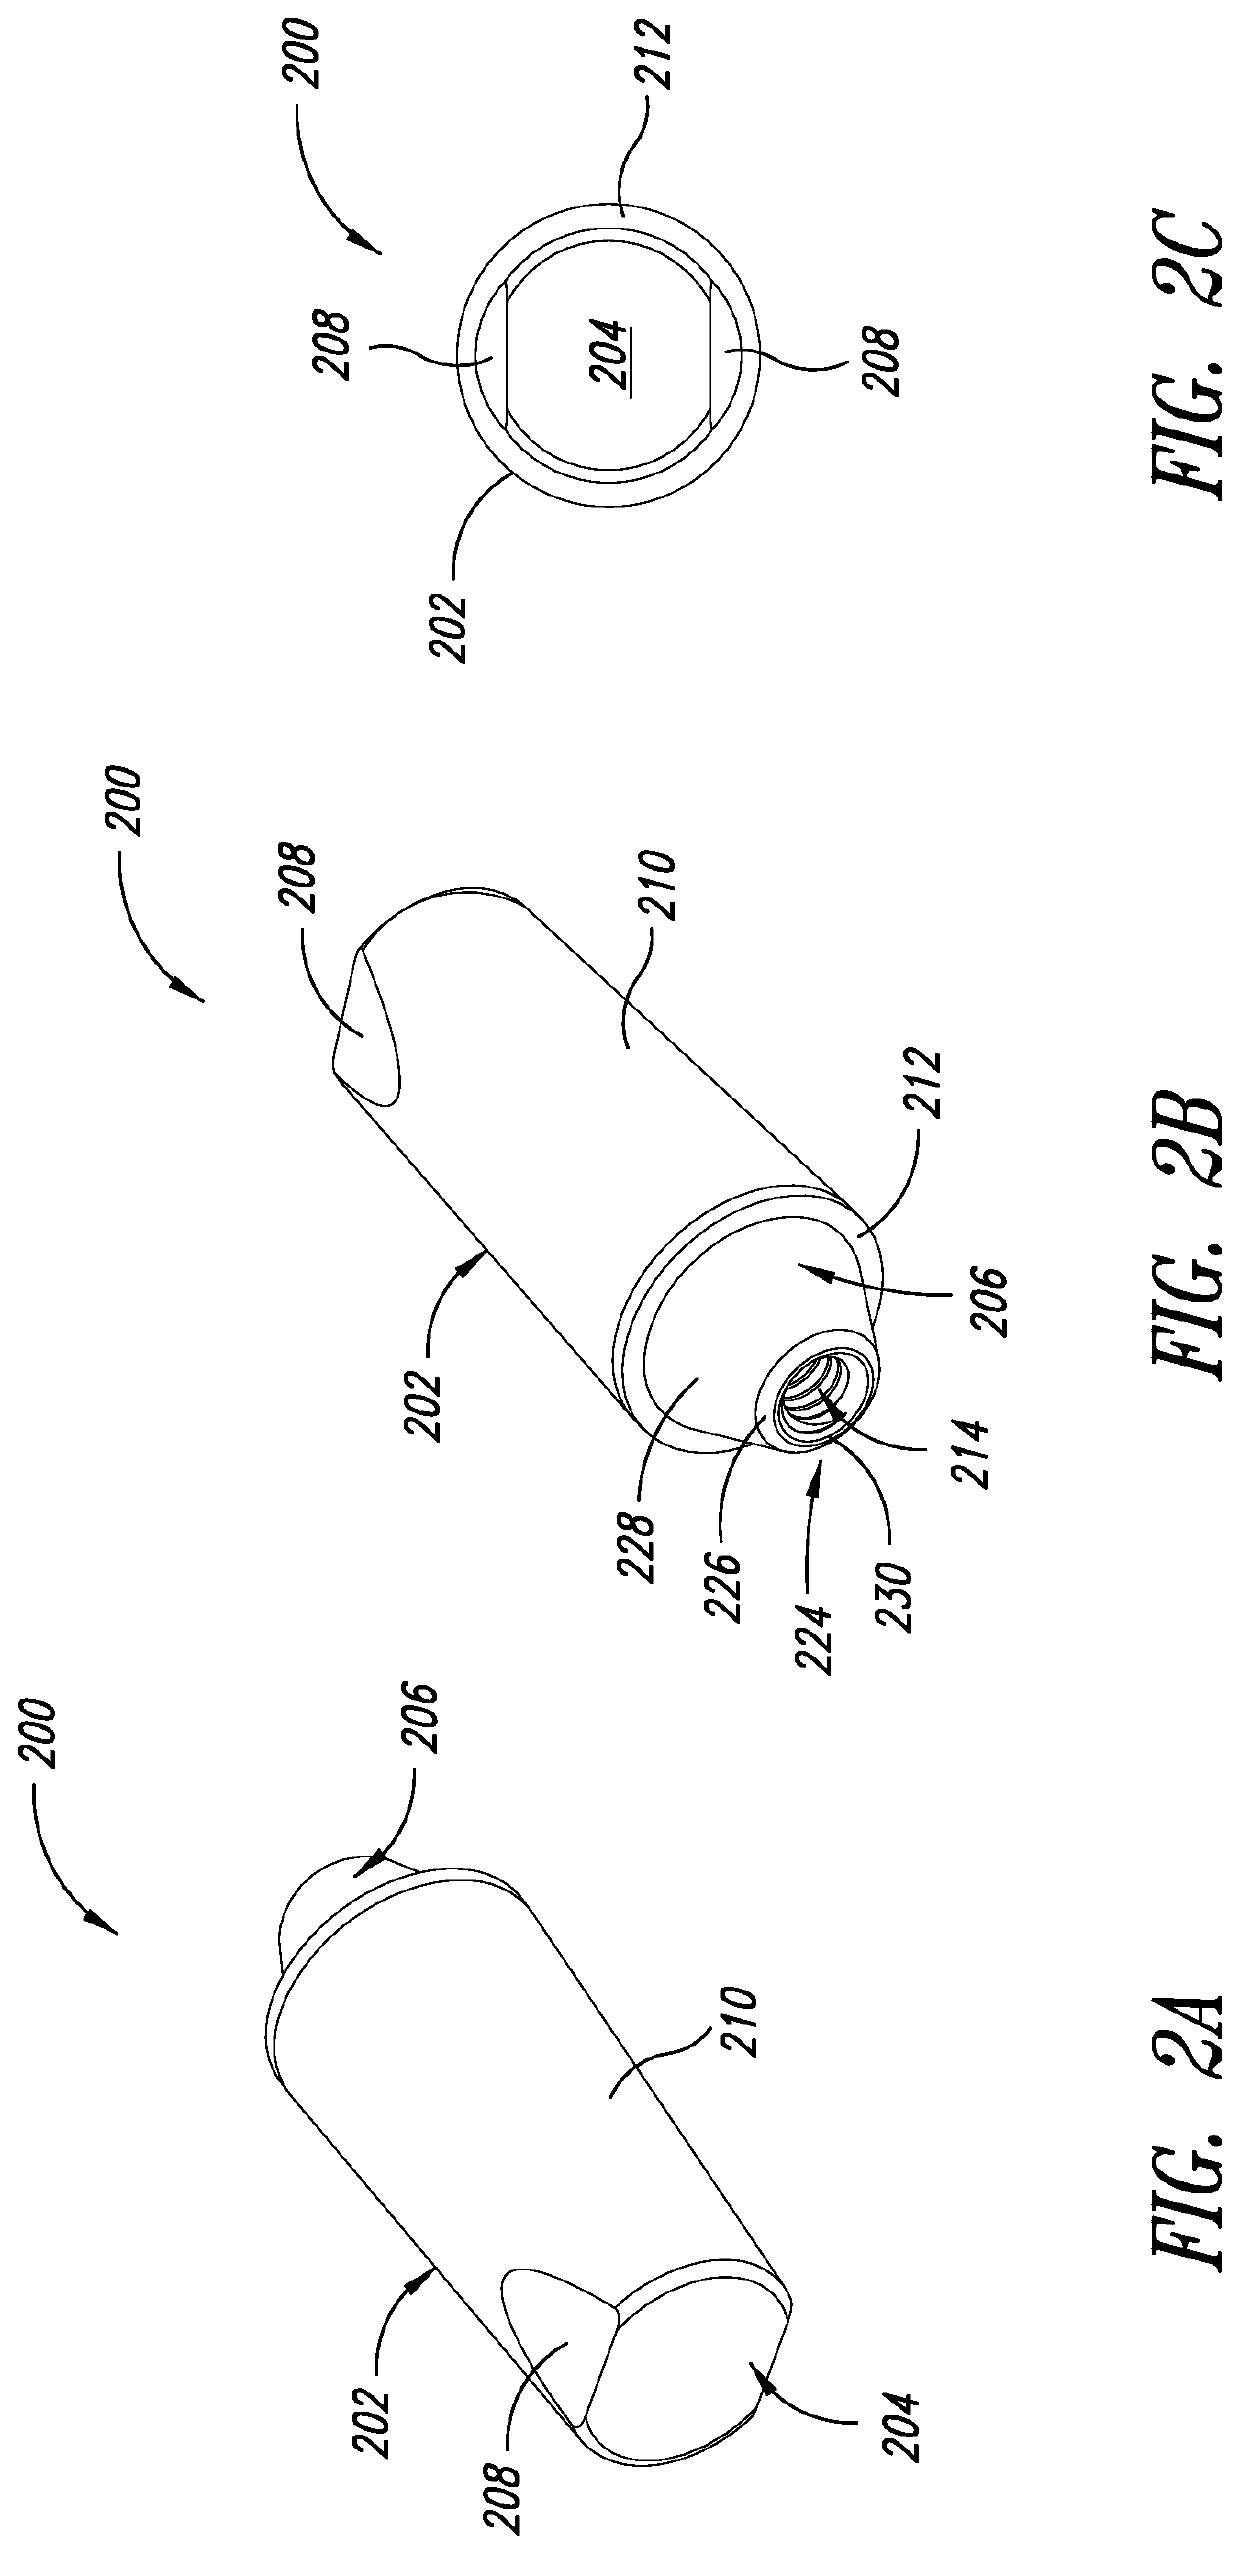 System and method of digital workflow for surgical and restorative dentistry